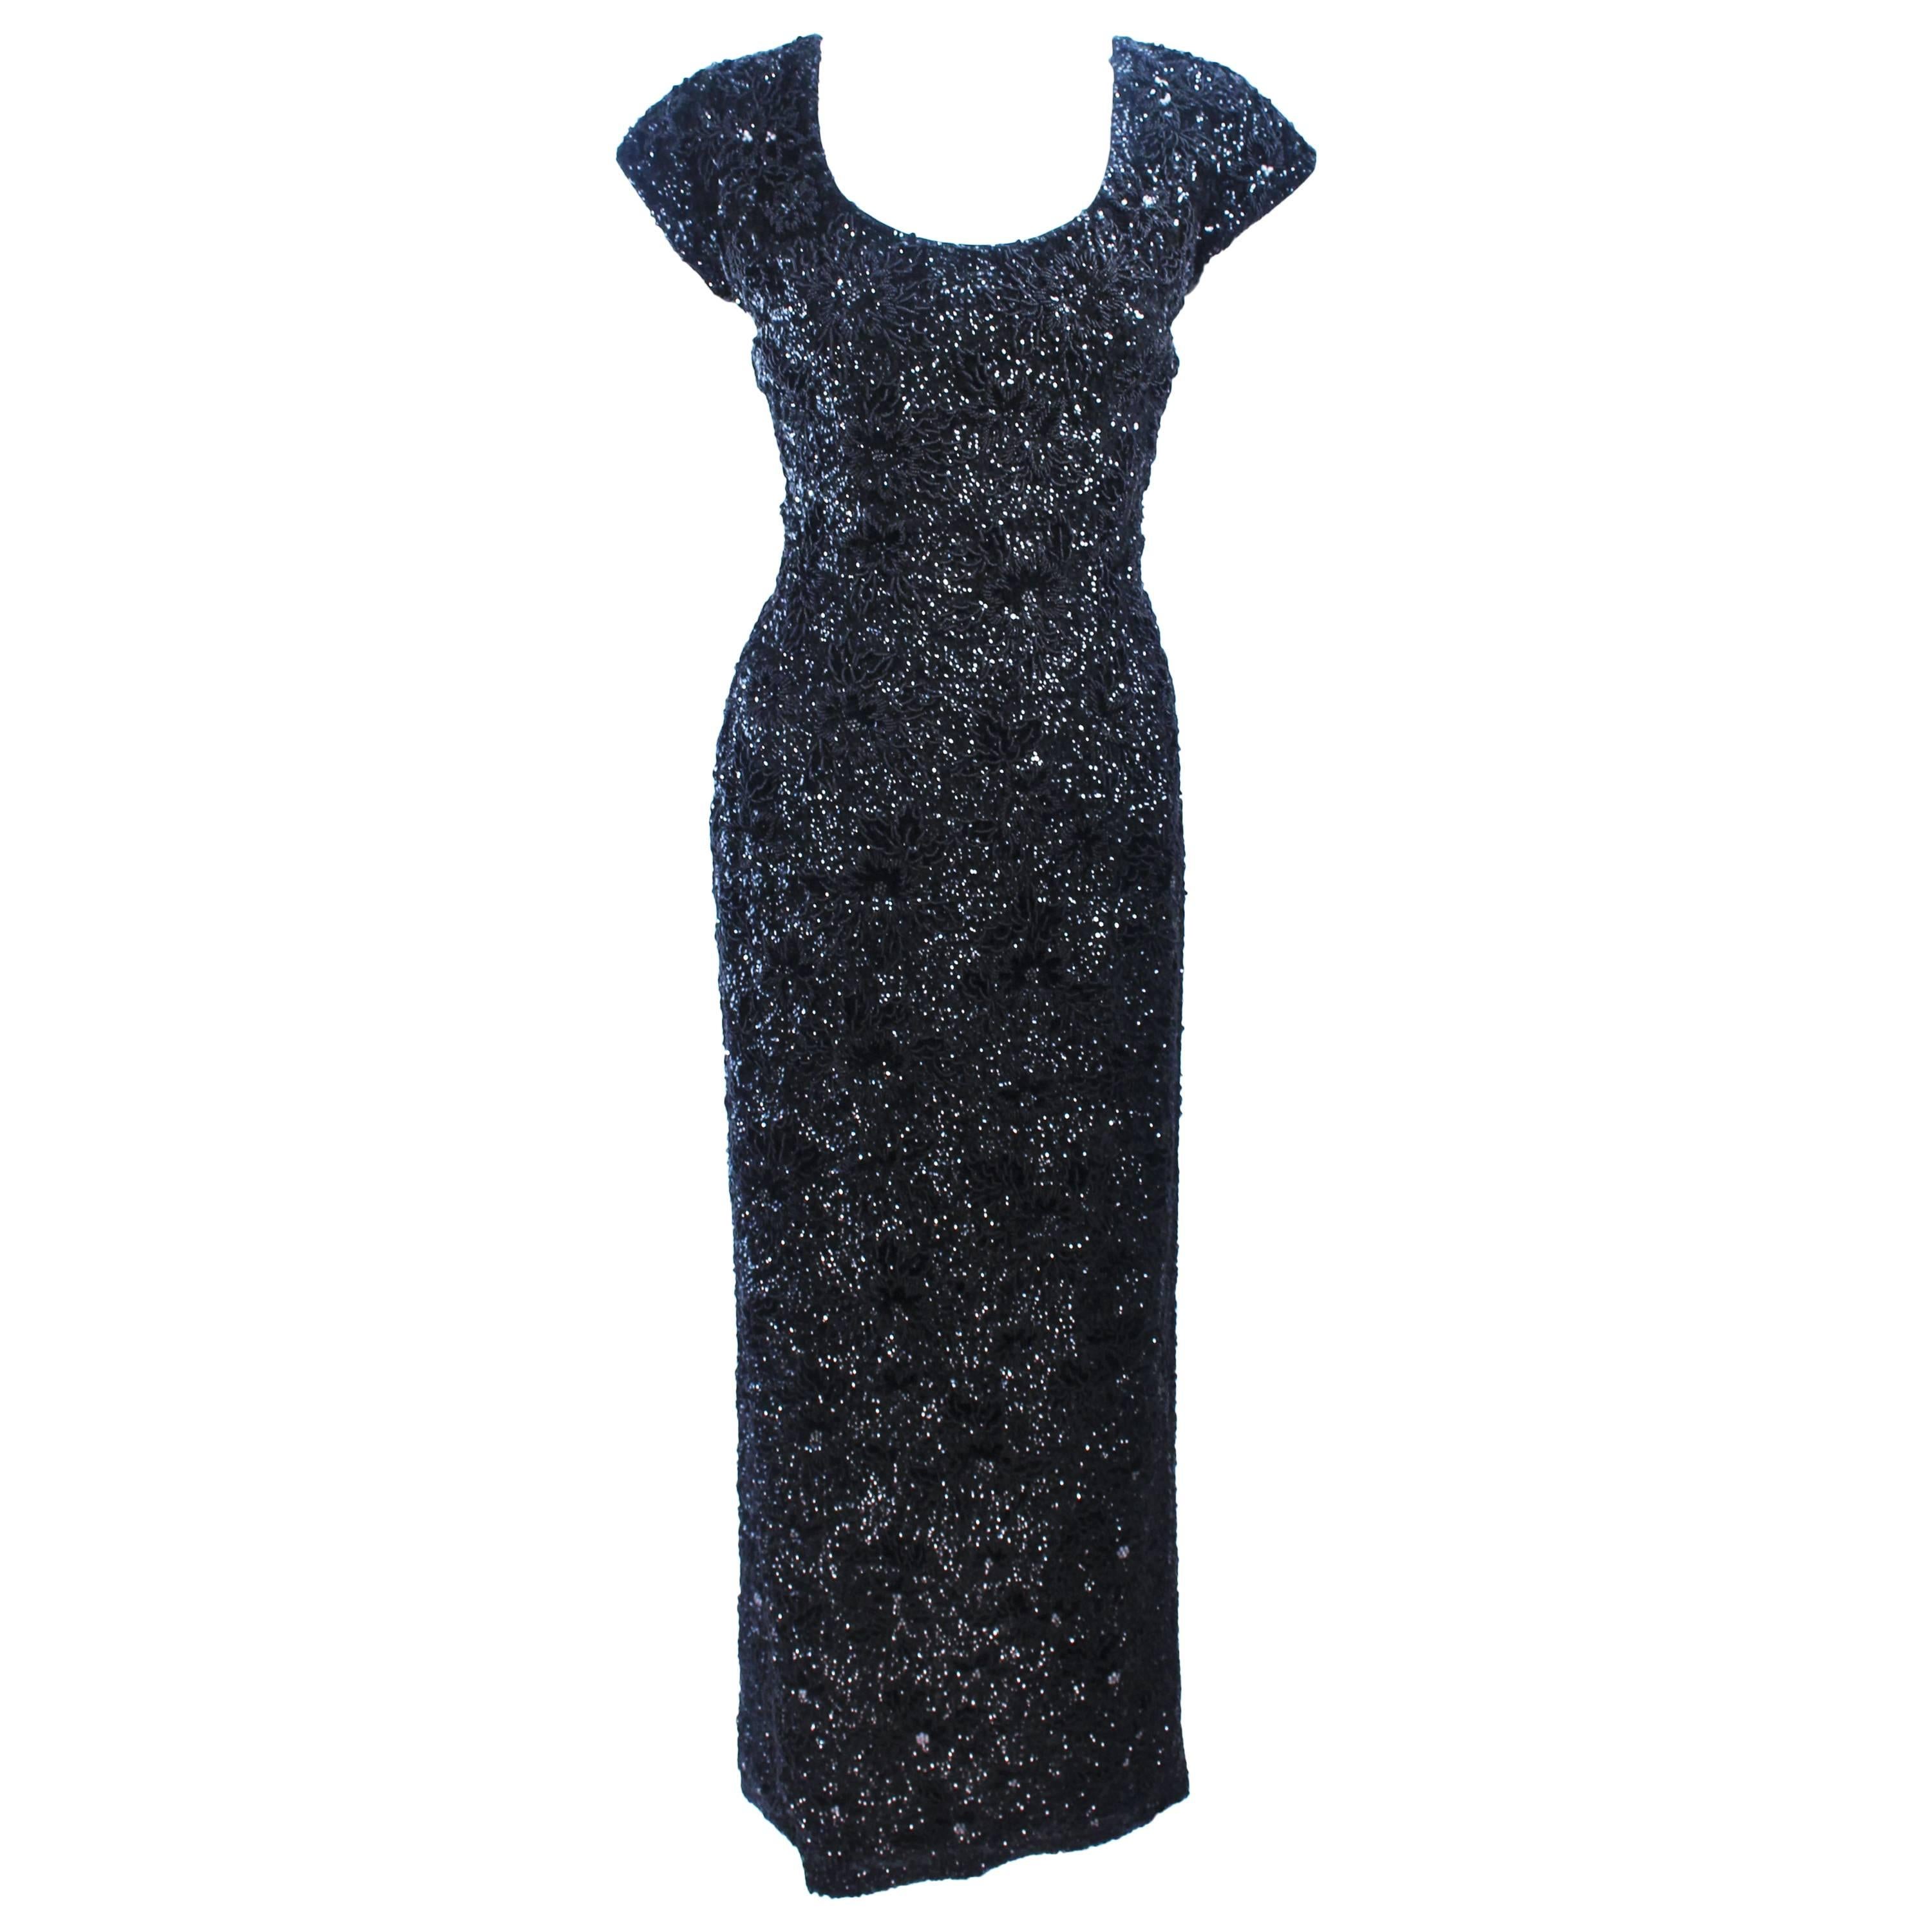 BRUCE ARNOLD 1960's Black Hand-Beaded Gown Size 6  For Sale